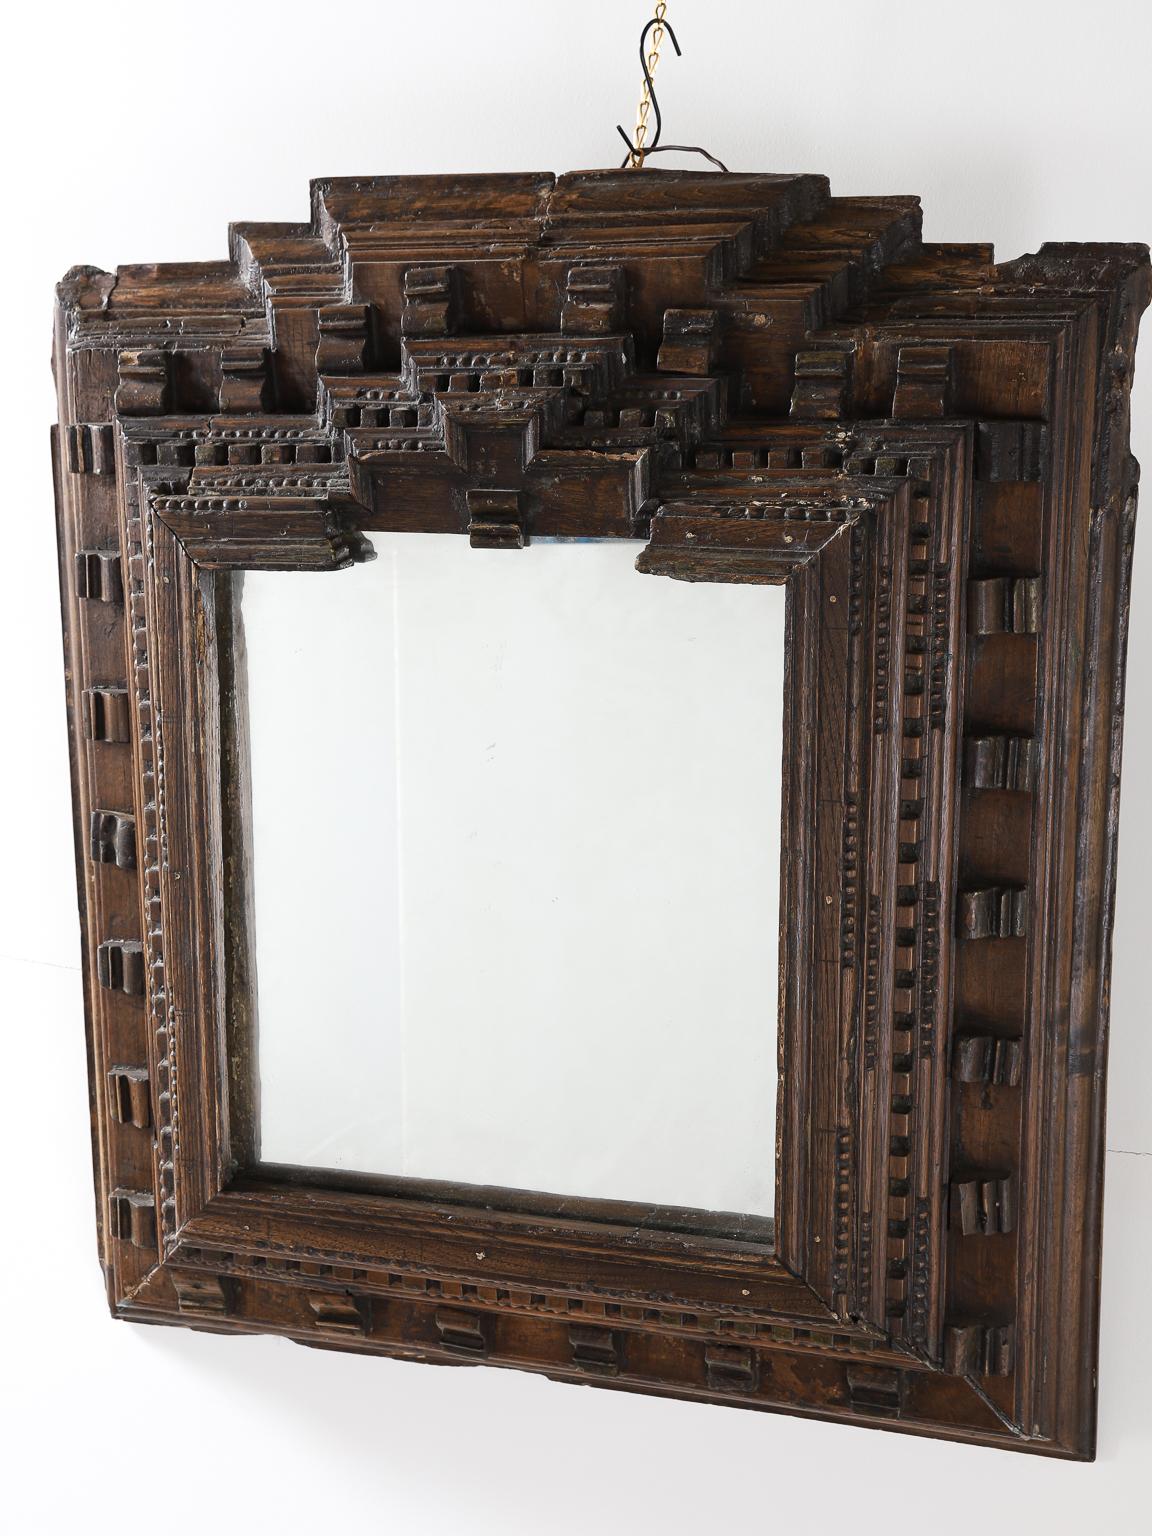 Large 17th Century hand carved wood mirror. Beautifully carved details and patterns. The wood condition is consistent with age, mirror plate has been replaced as well as a new back board added as shown in photographs.